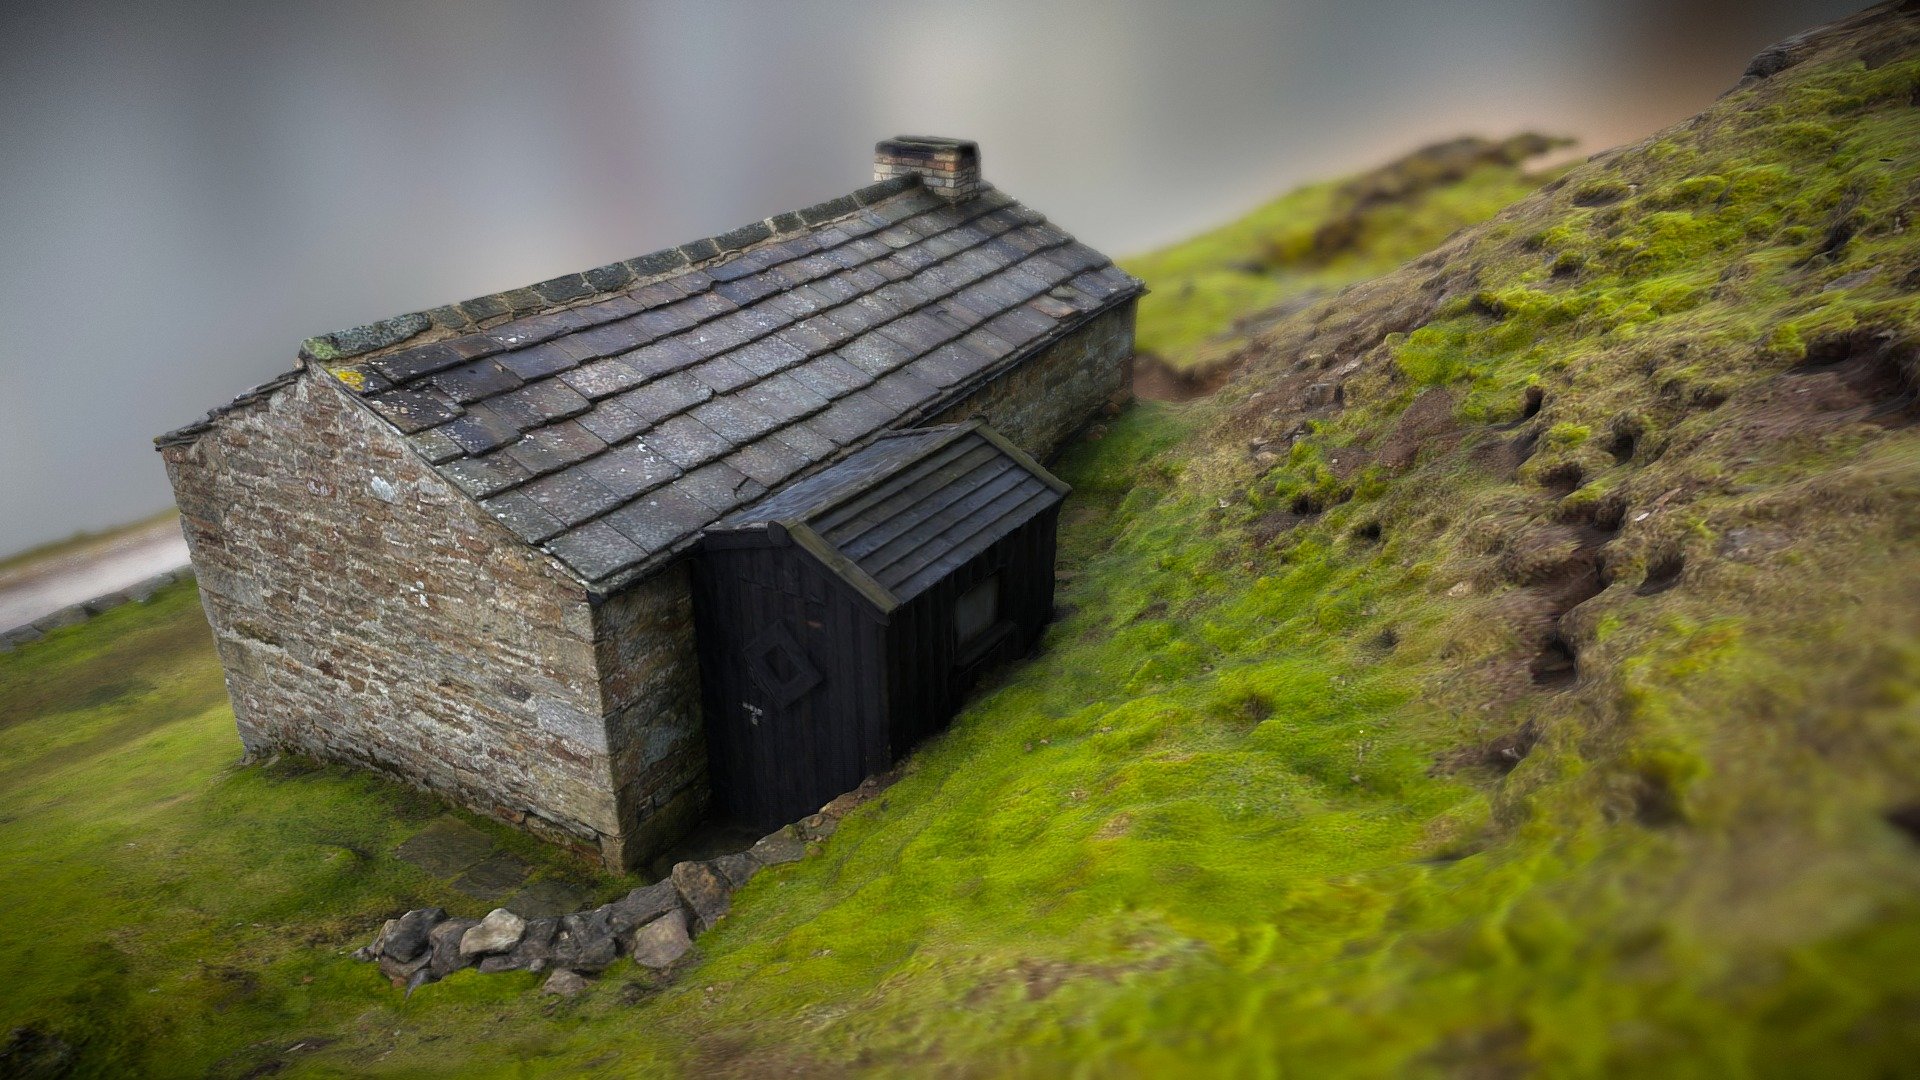 94 photos taken on Nikon D200 and processed with Photoscan - Stone Hut - 3D model by Paul (@paul3uk) 3d model